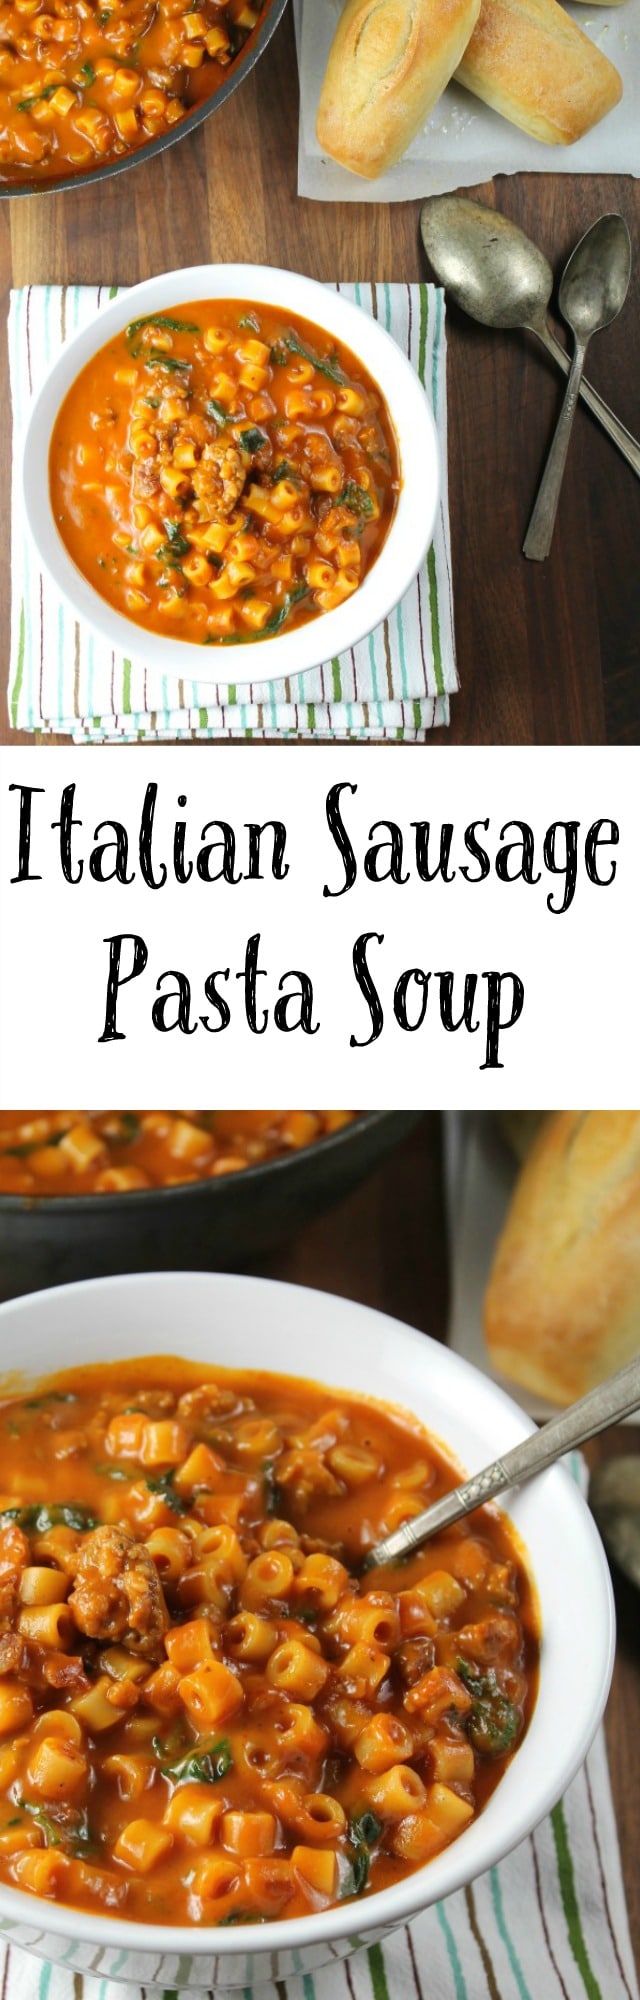 Italian Sausage Pasta Soup - Miss in the Kitchen